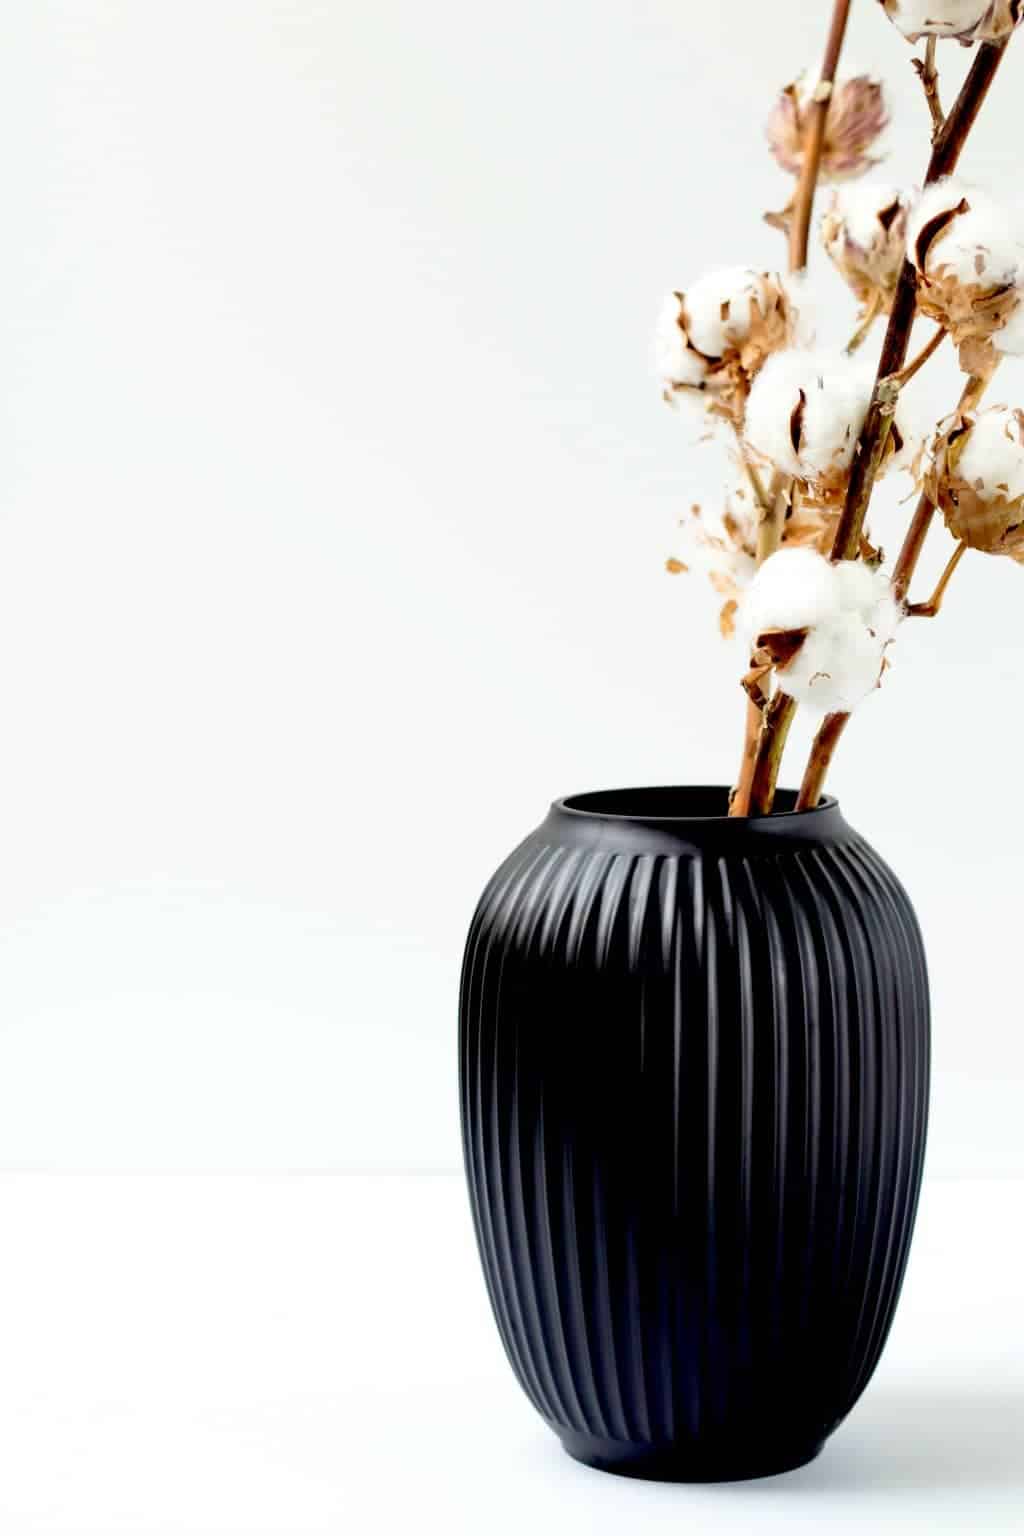 A minimalist black vase with cotton inside of it